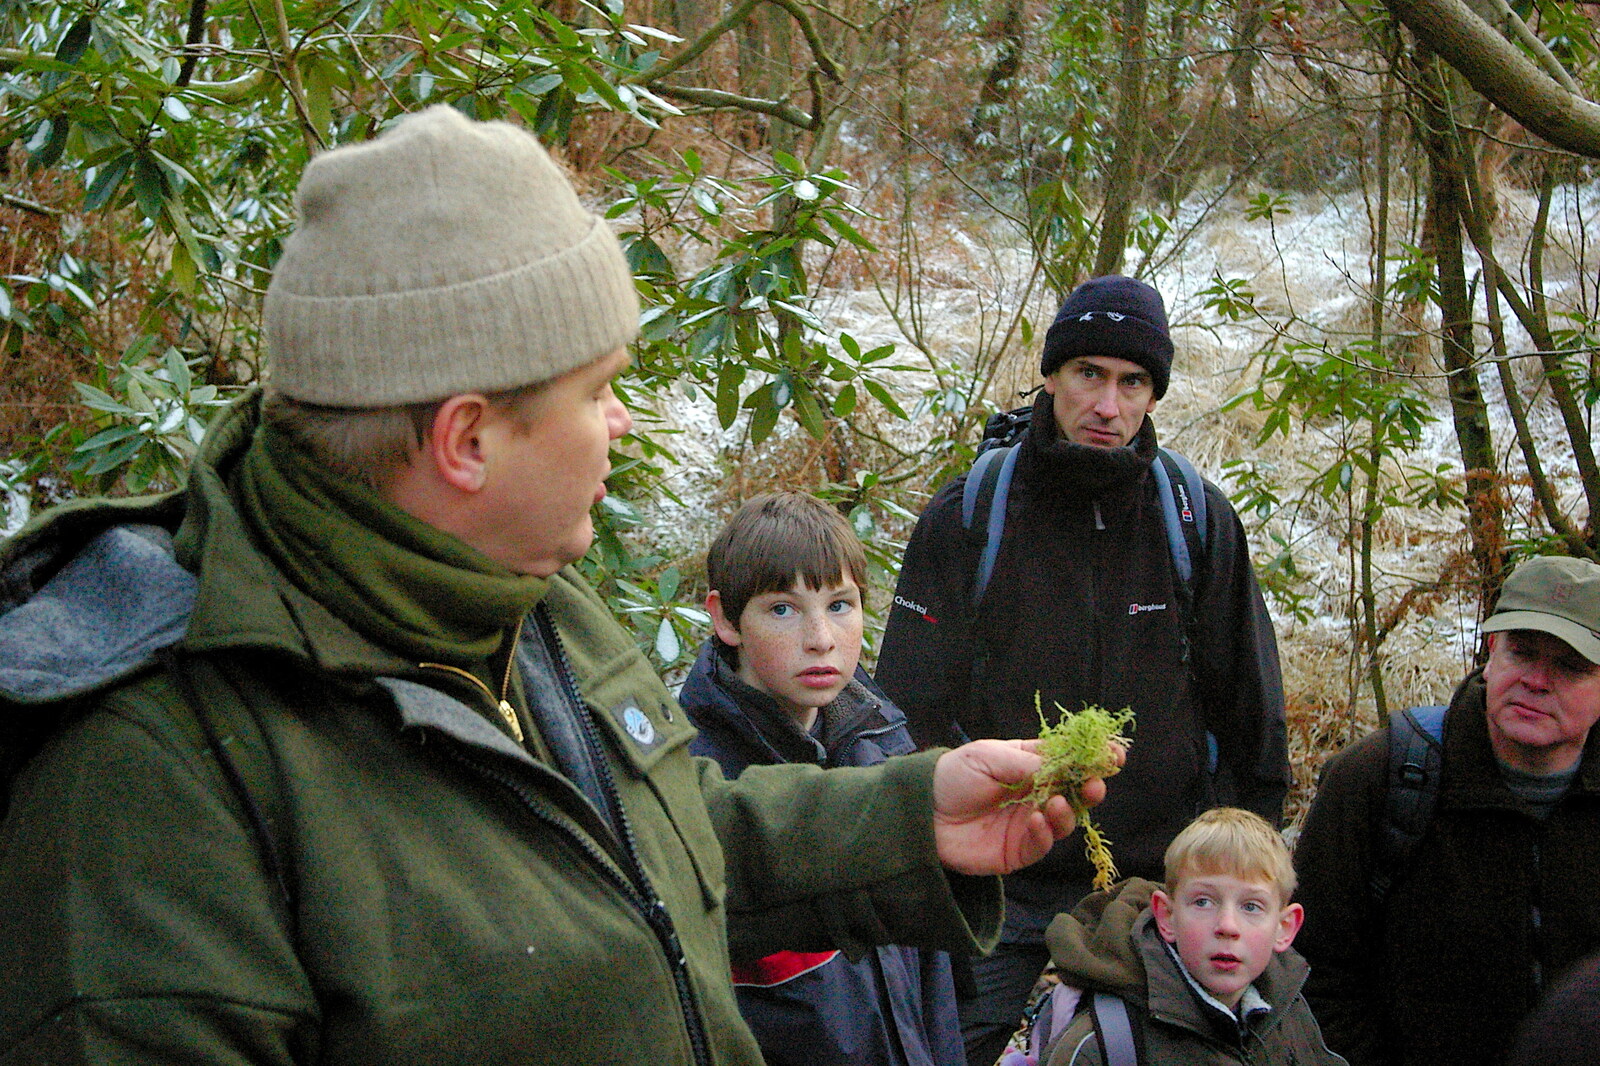 The uses of sphagnum moss are explained from Walk Like a Shadow: A Day With Ray Mears, Ashdown Forest, East Sussex - 29th December 2005